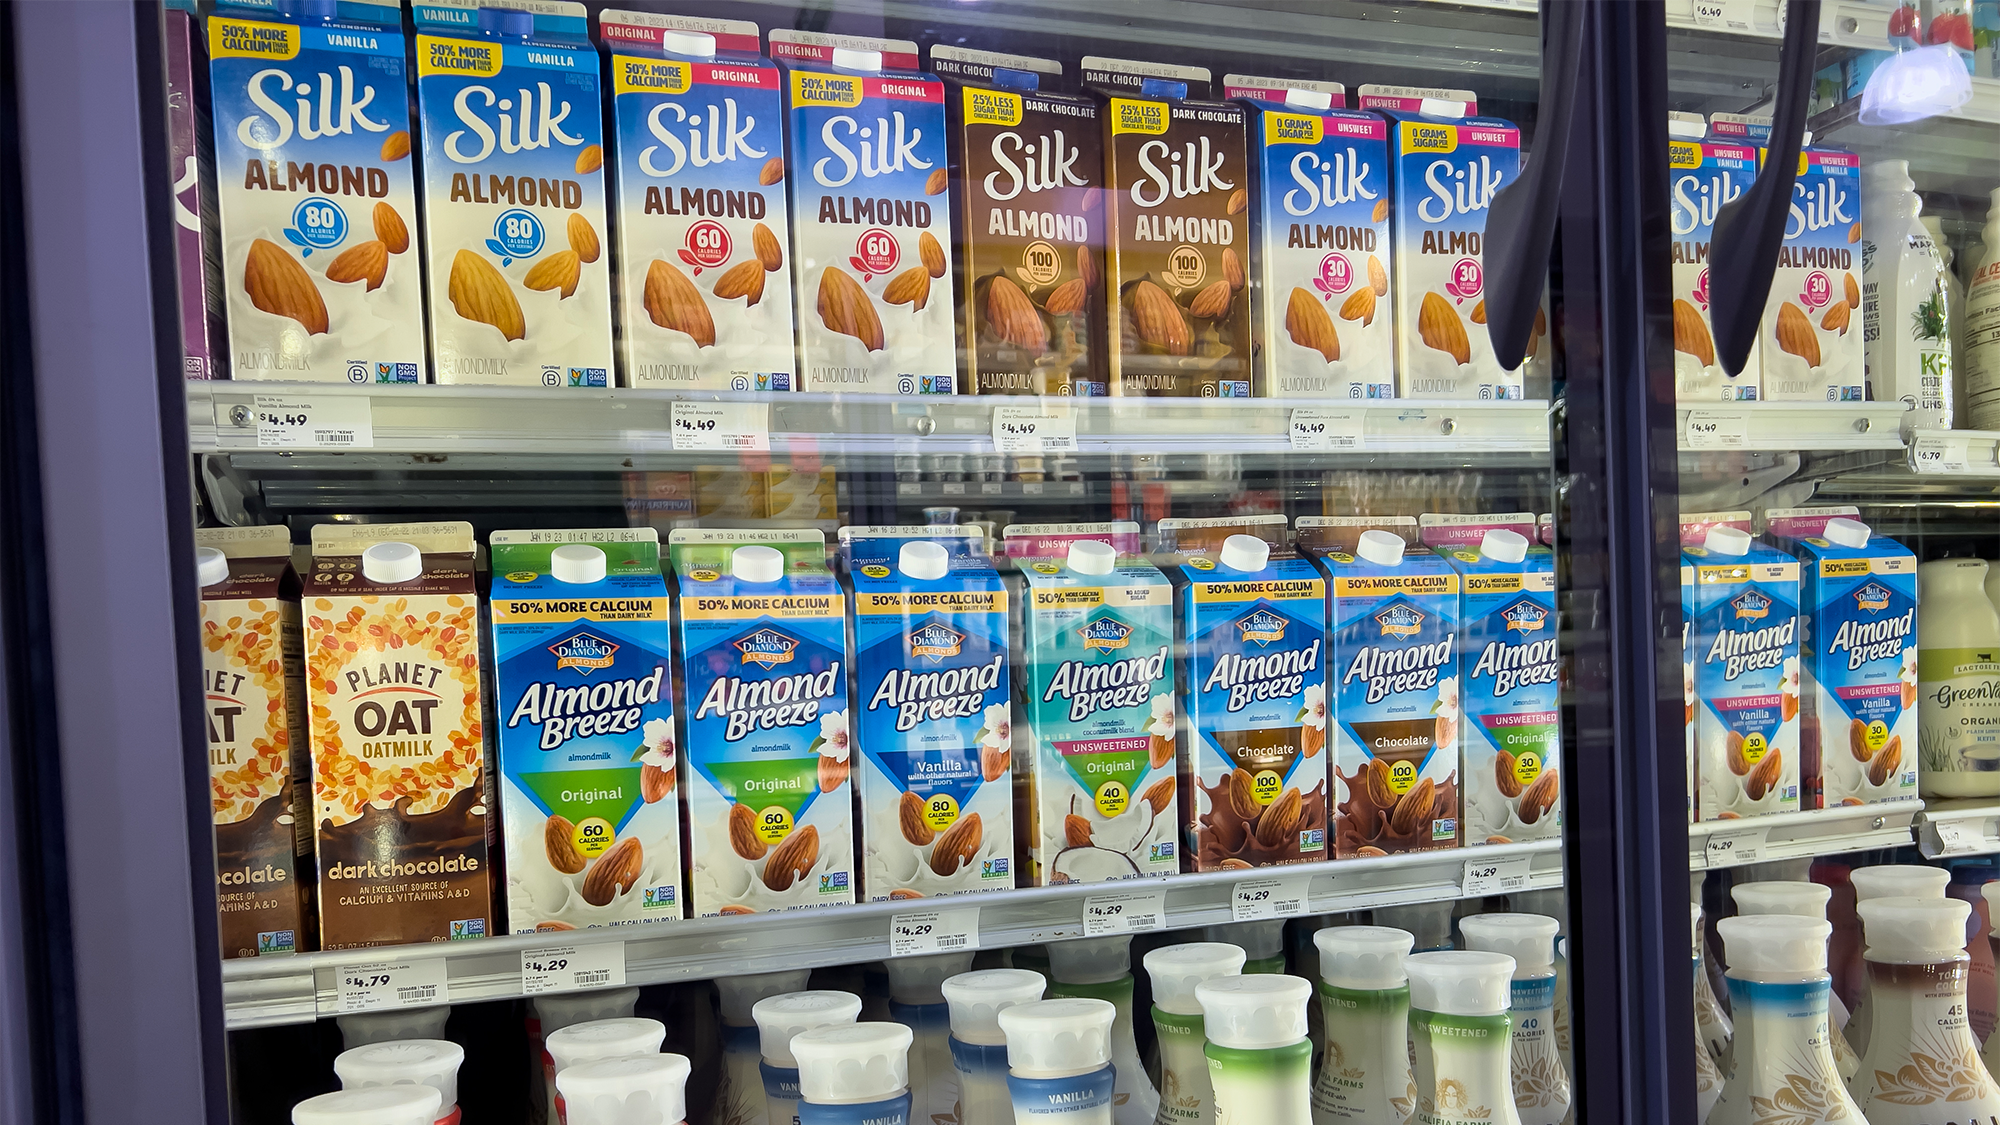 Three rows of various plant-based milks in a grocery store refrigerator.